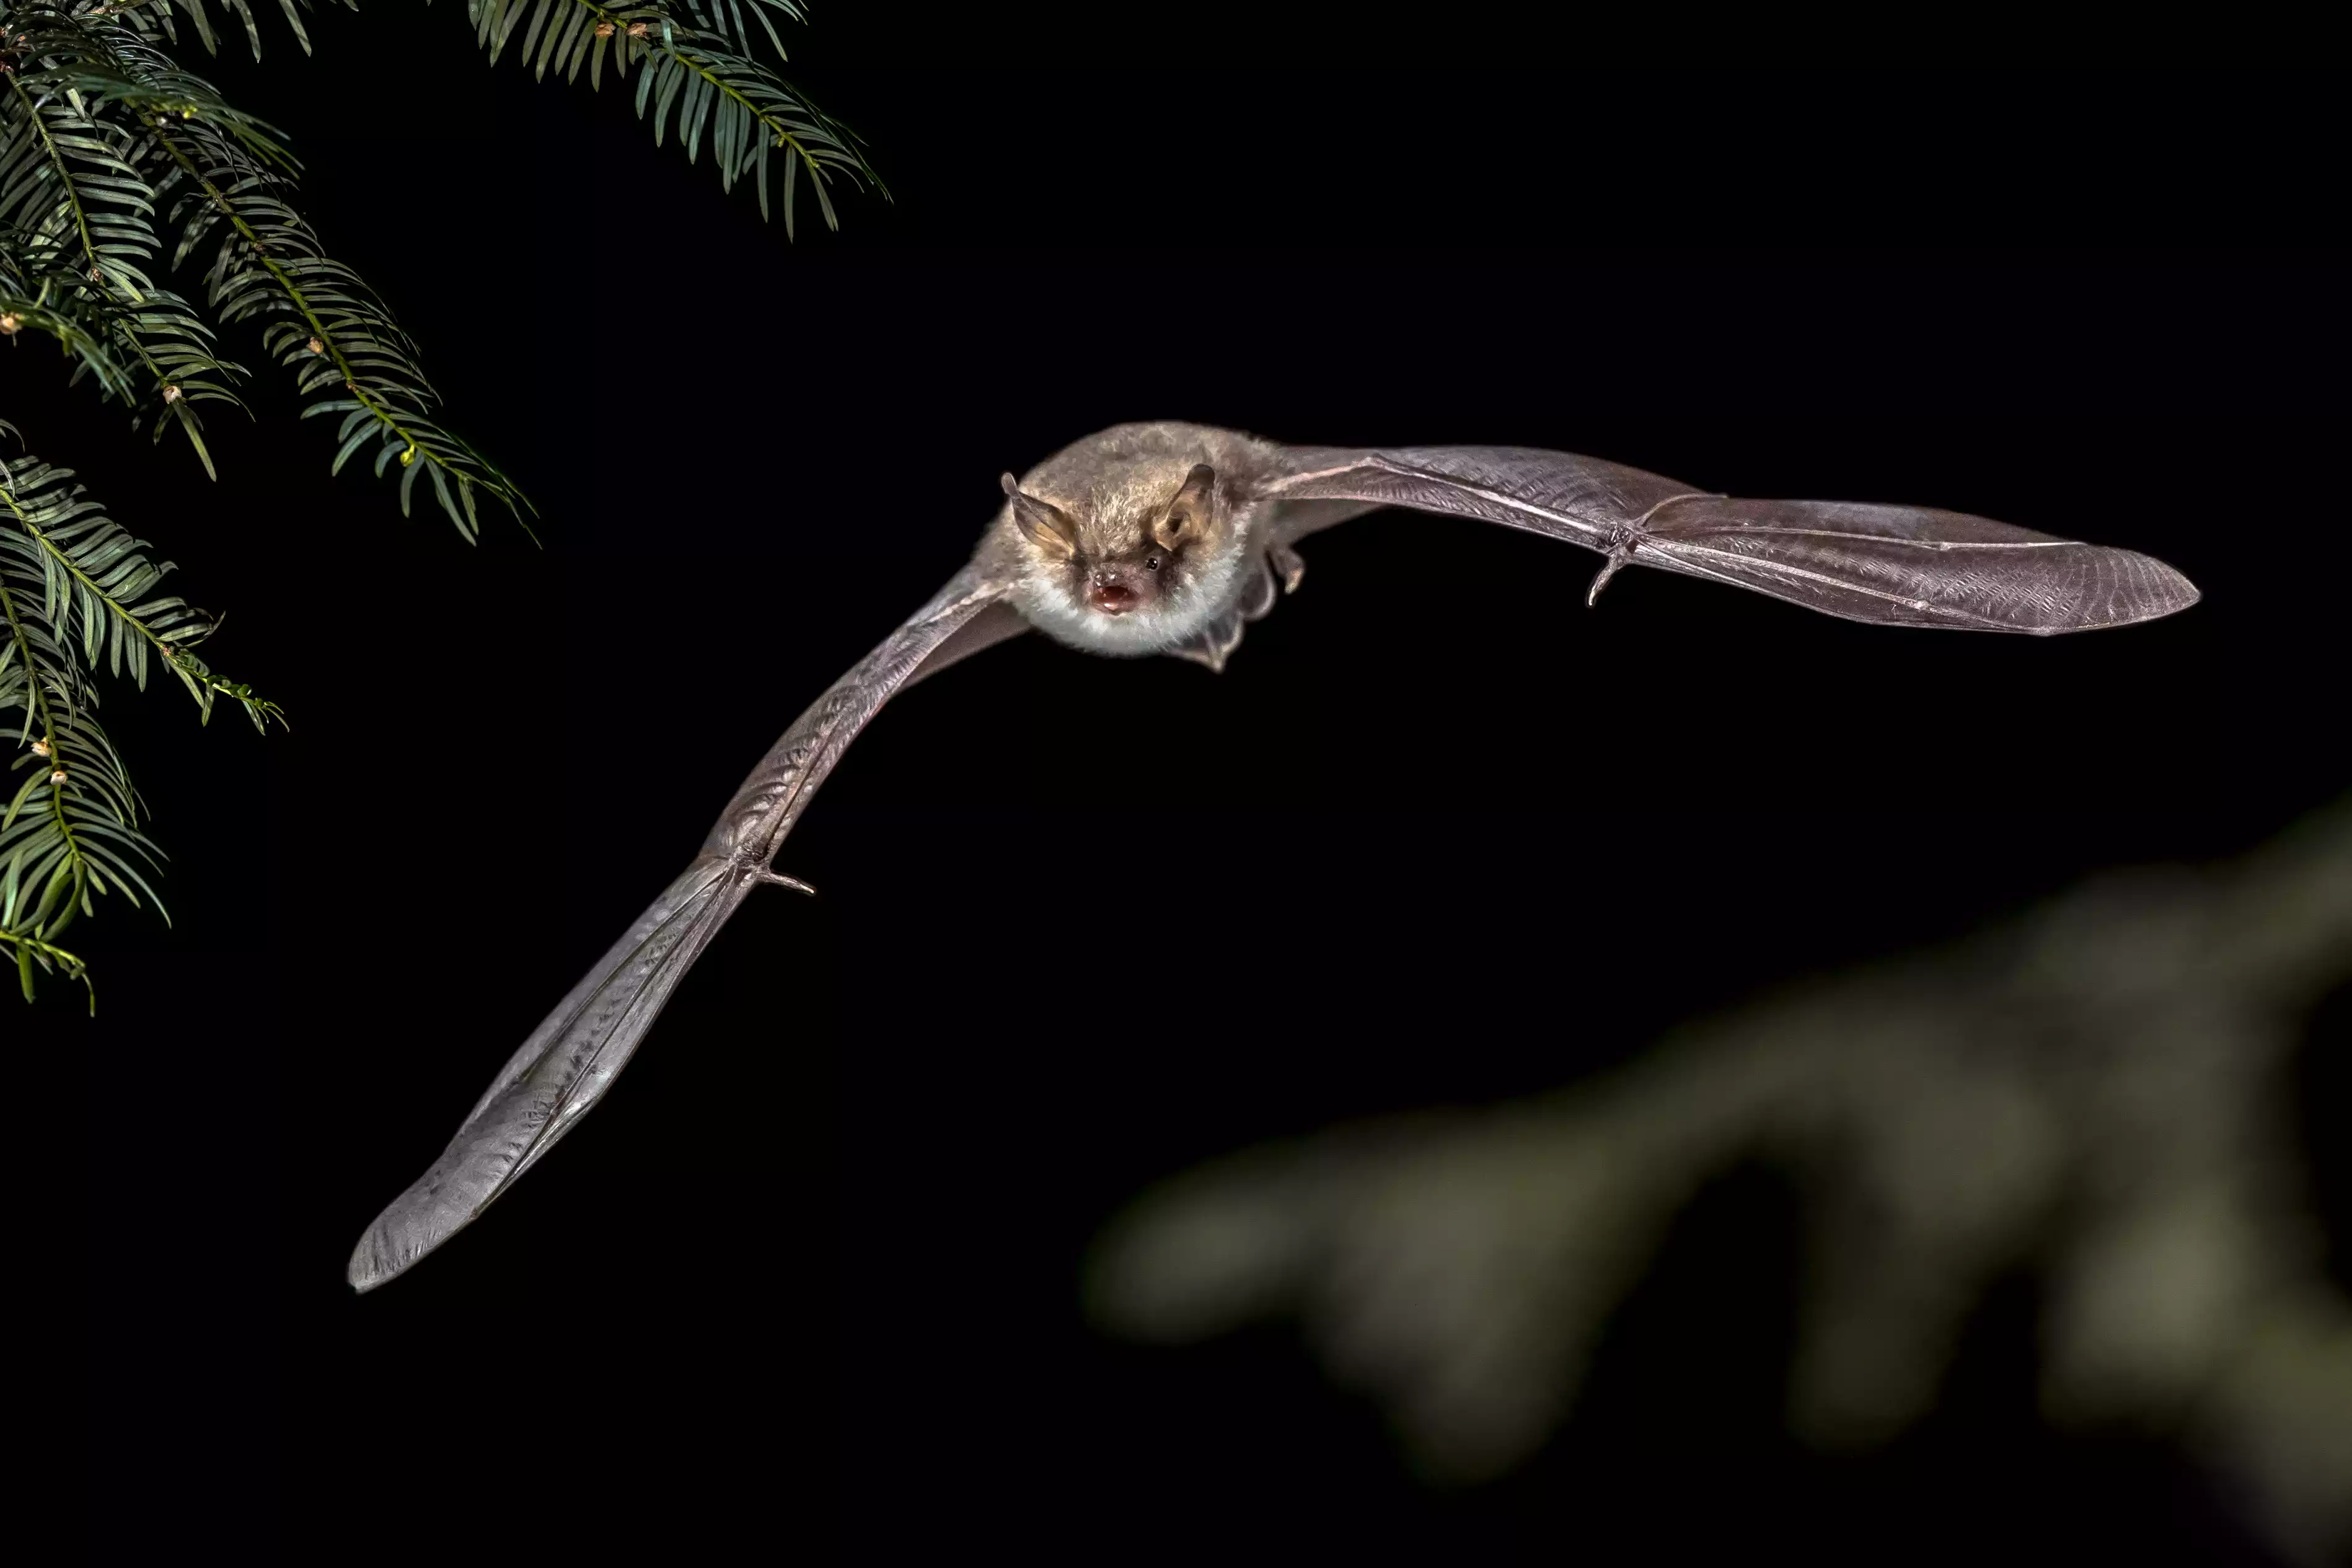 Natterers bat flying through the forest